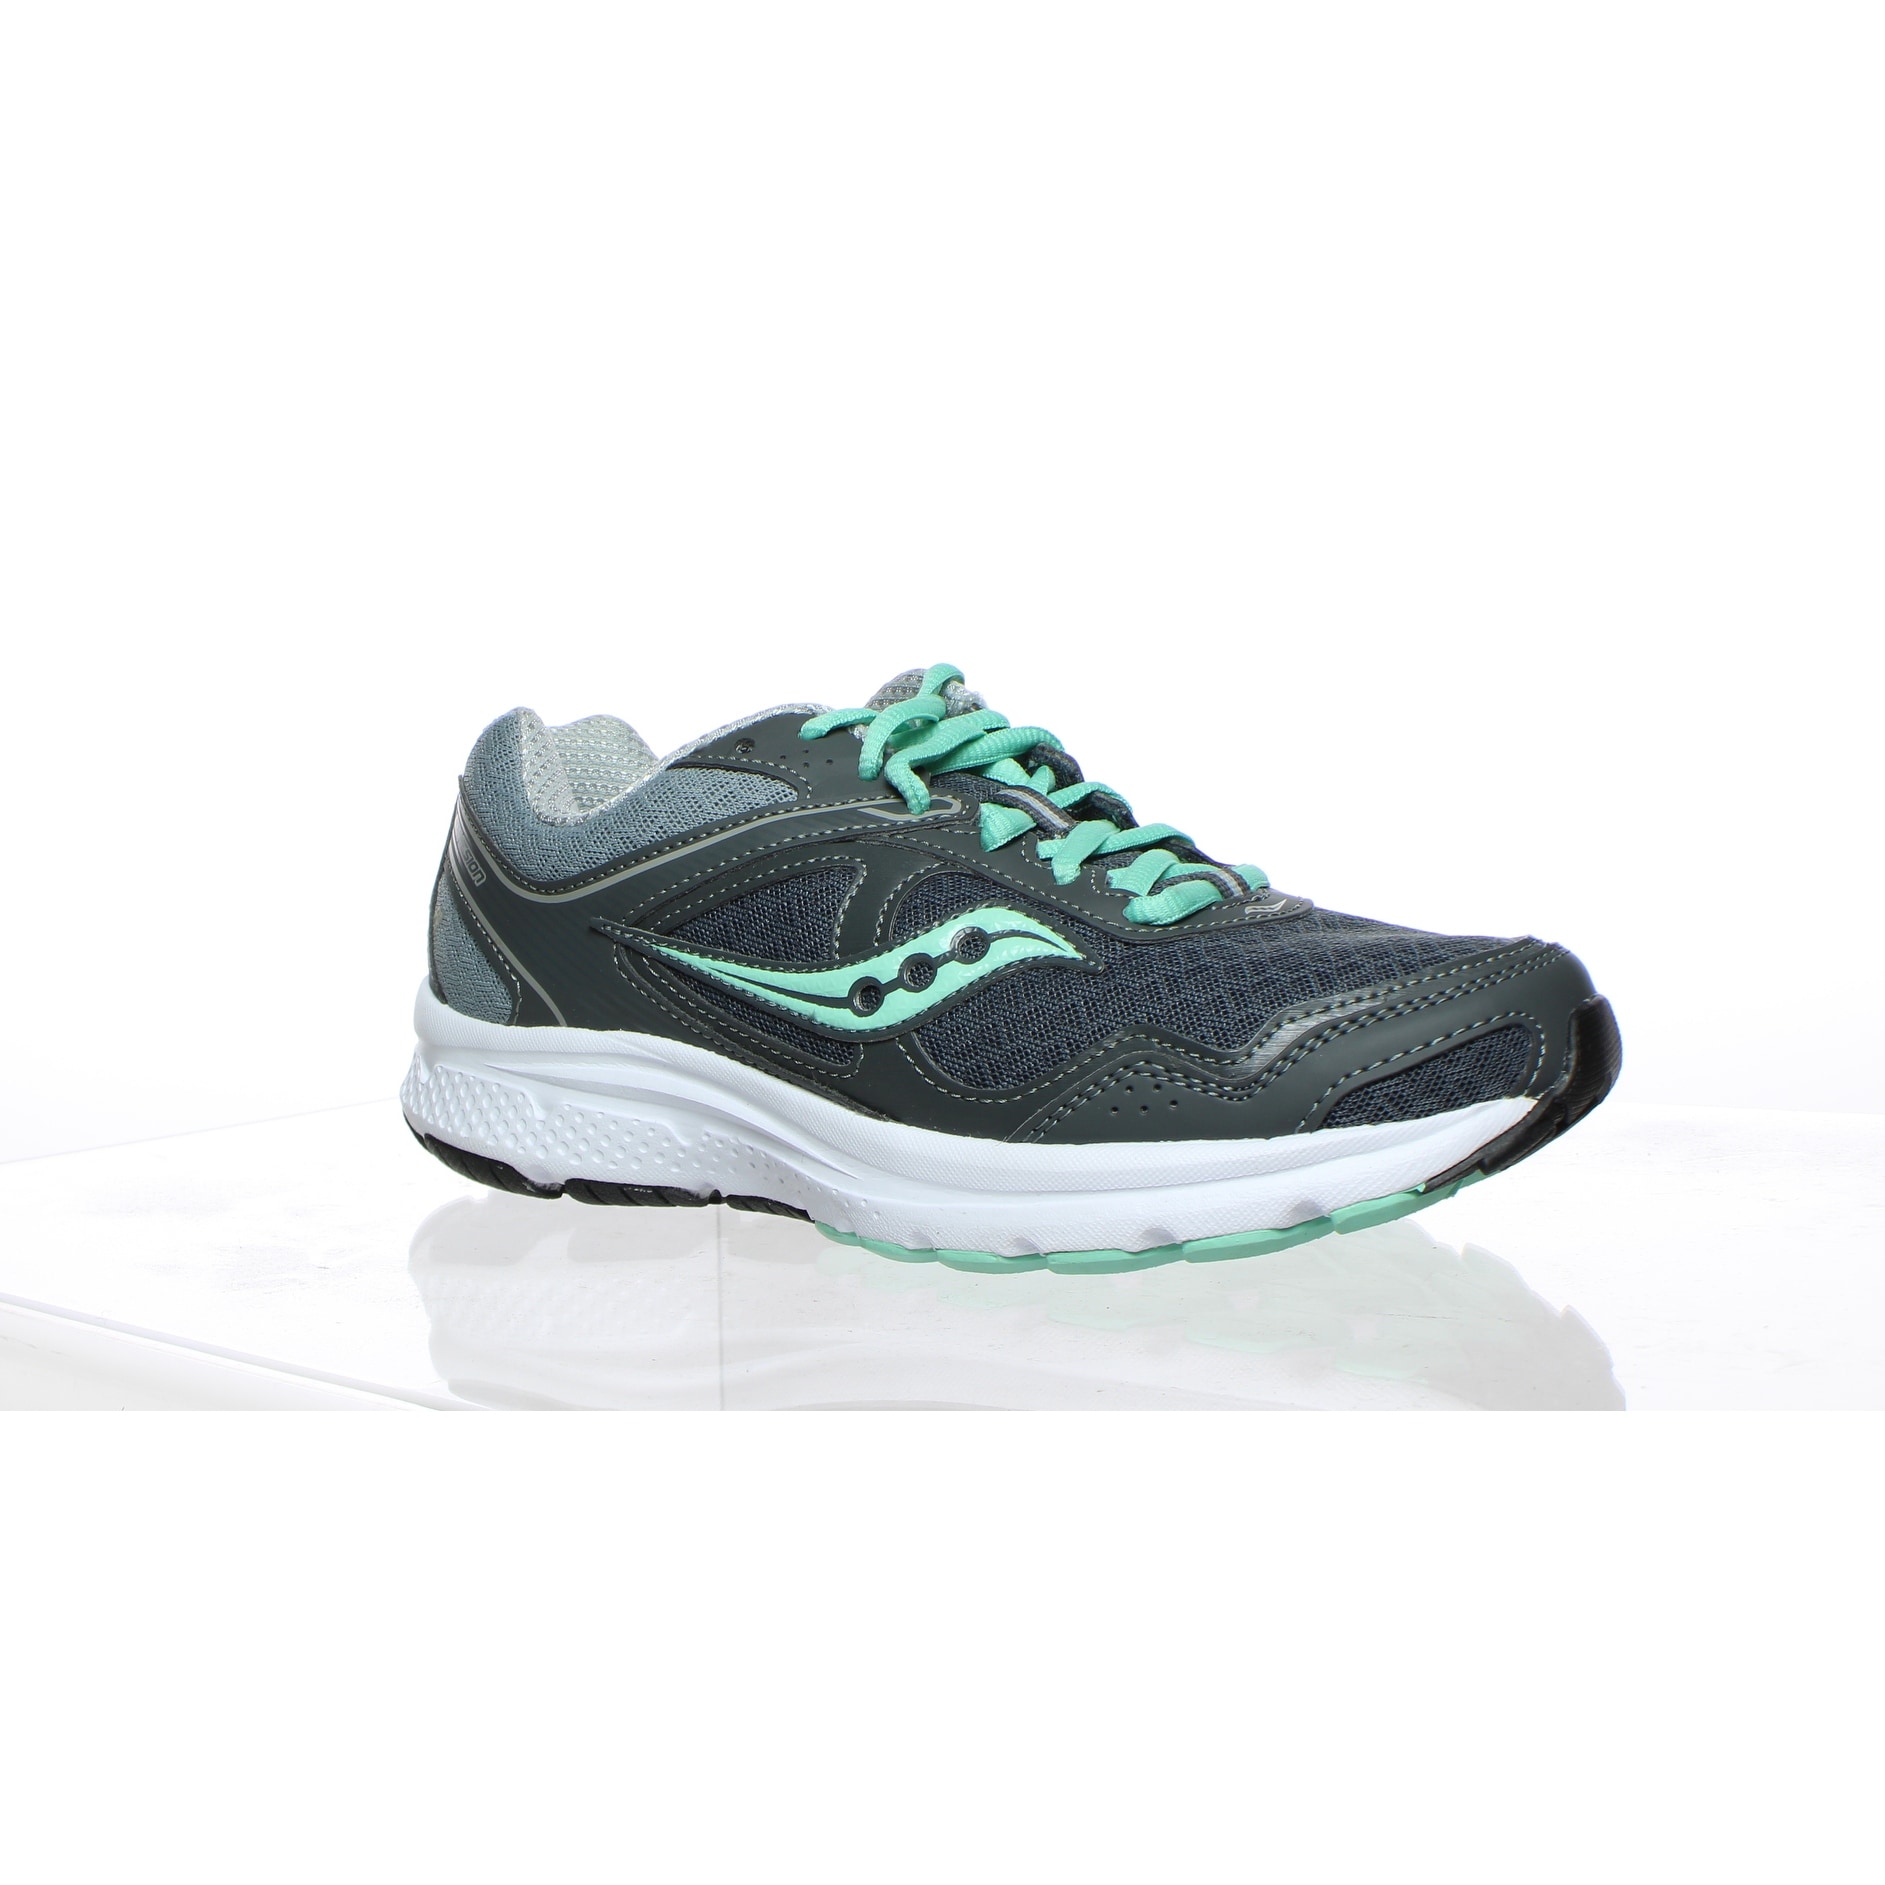 saucony cohesion 10 running shoes for ladies